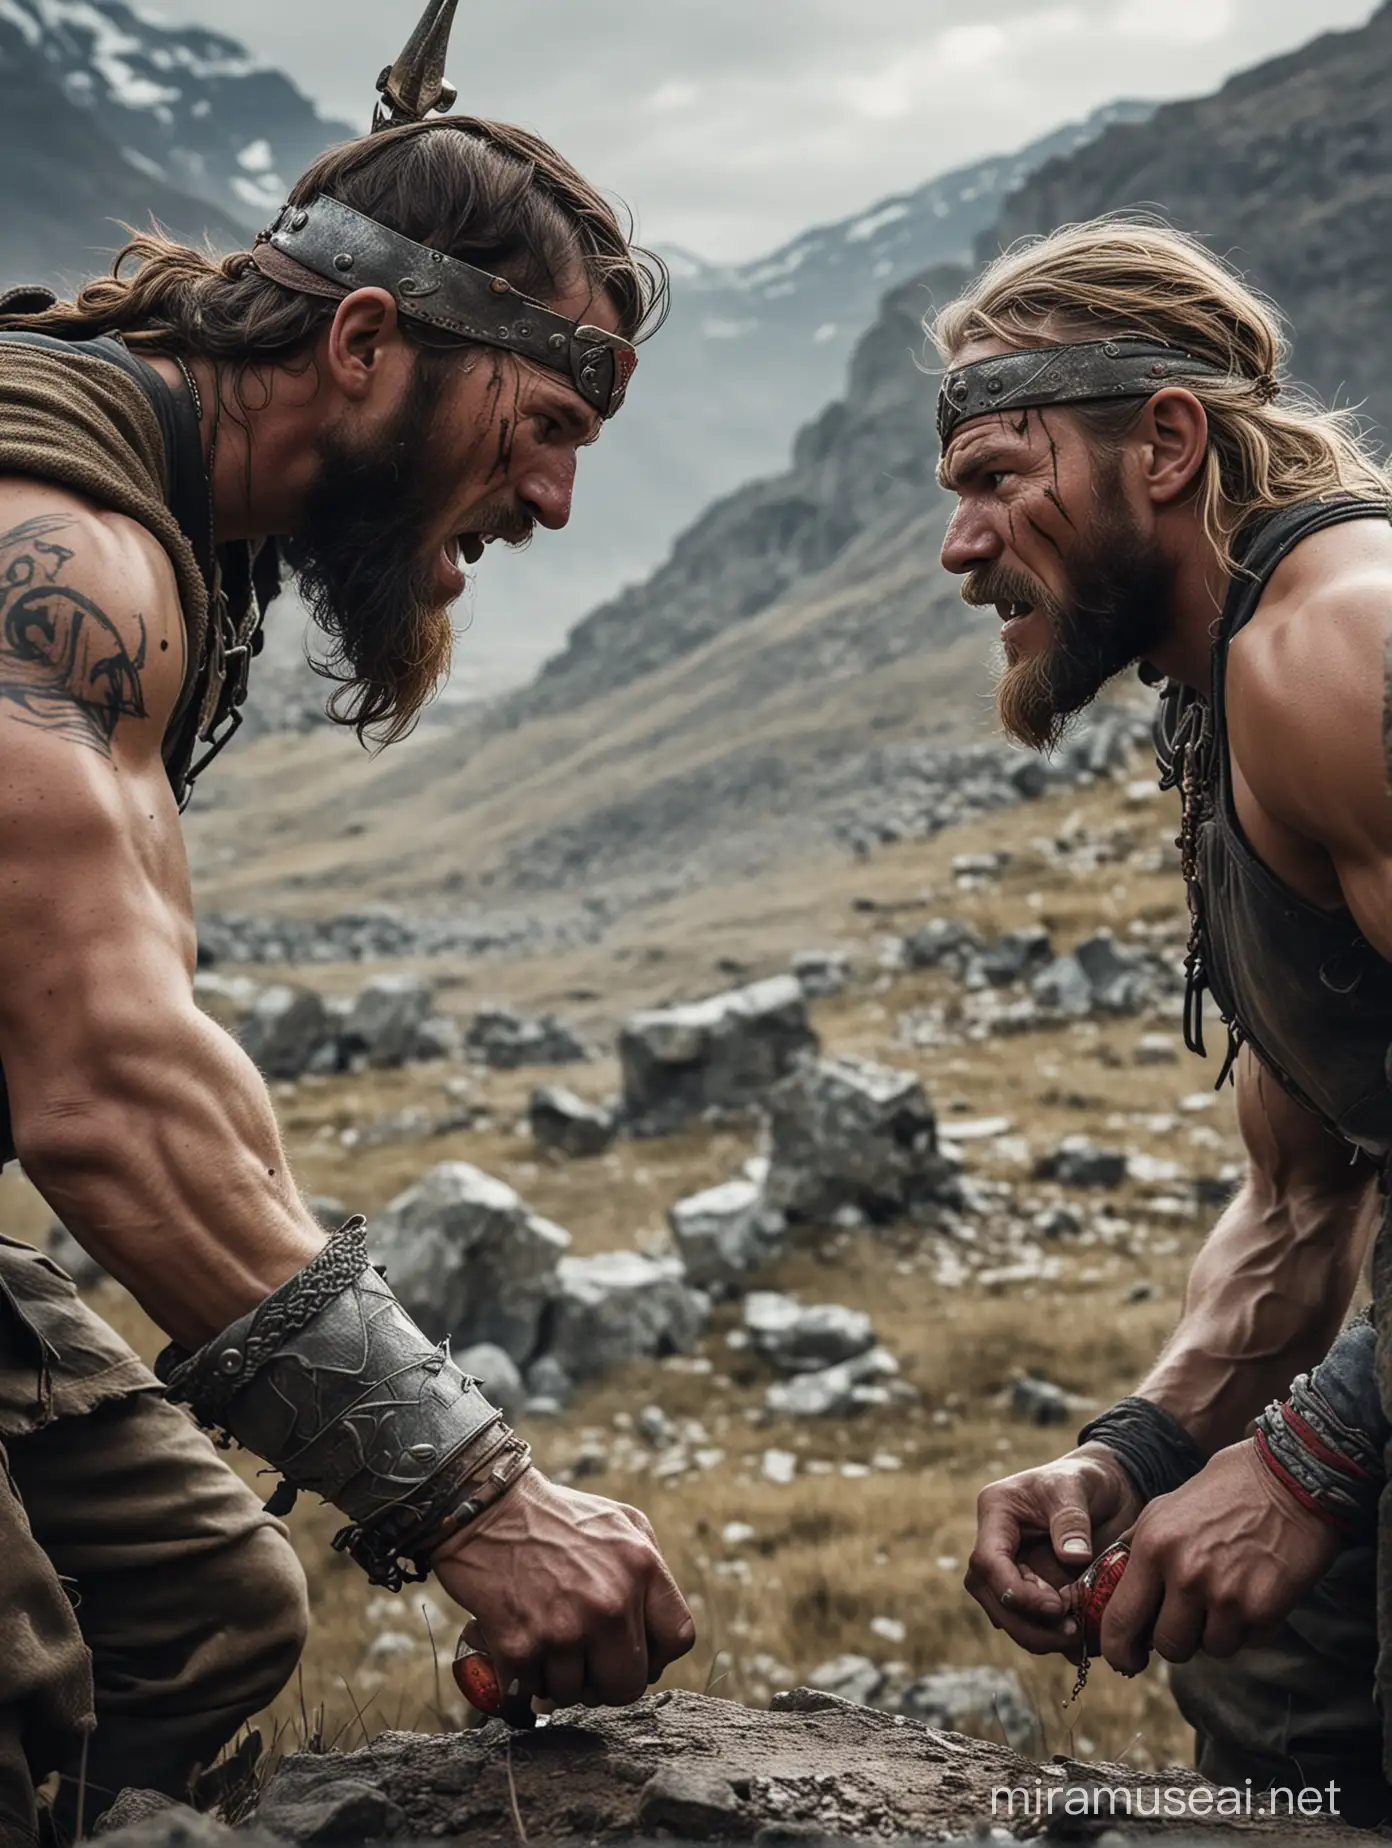 Epic Viking Battle for RedBull Supremacy in Rugged Mountains